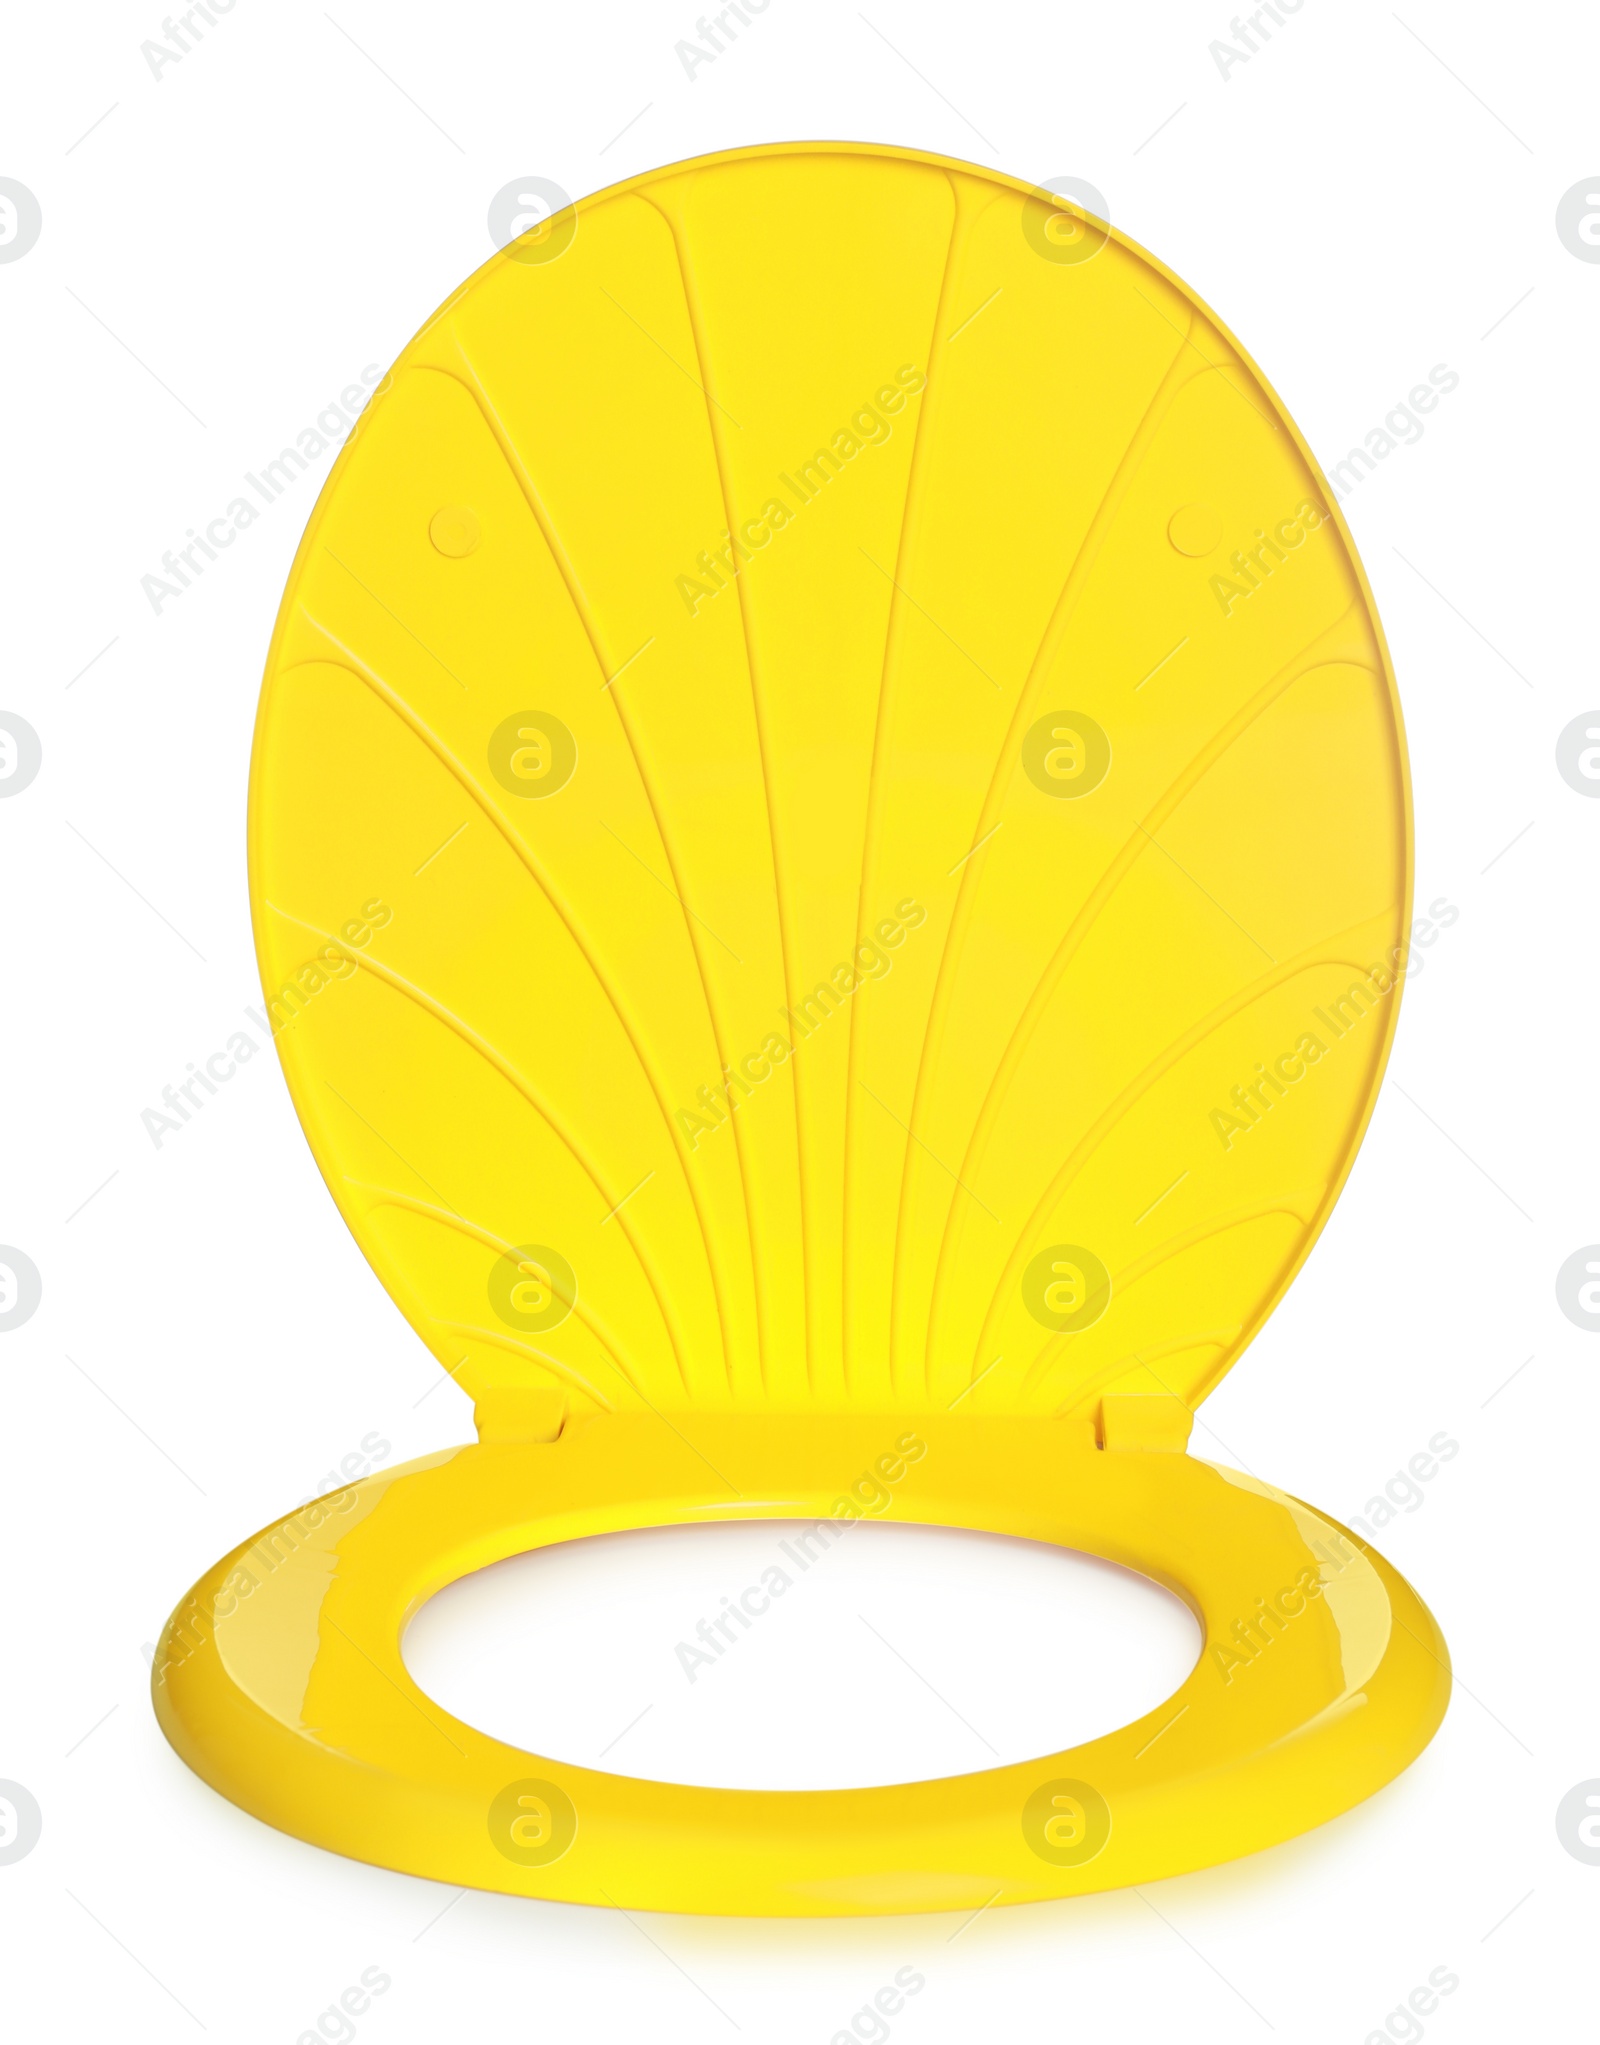 Photo of New yellow plastic toilet seat isolated on white